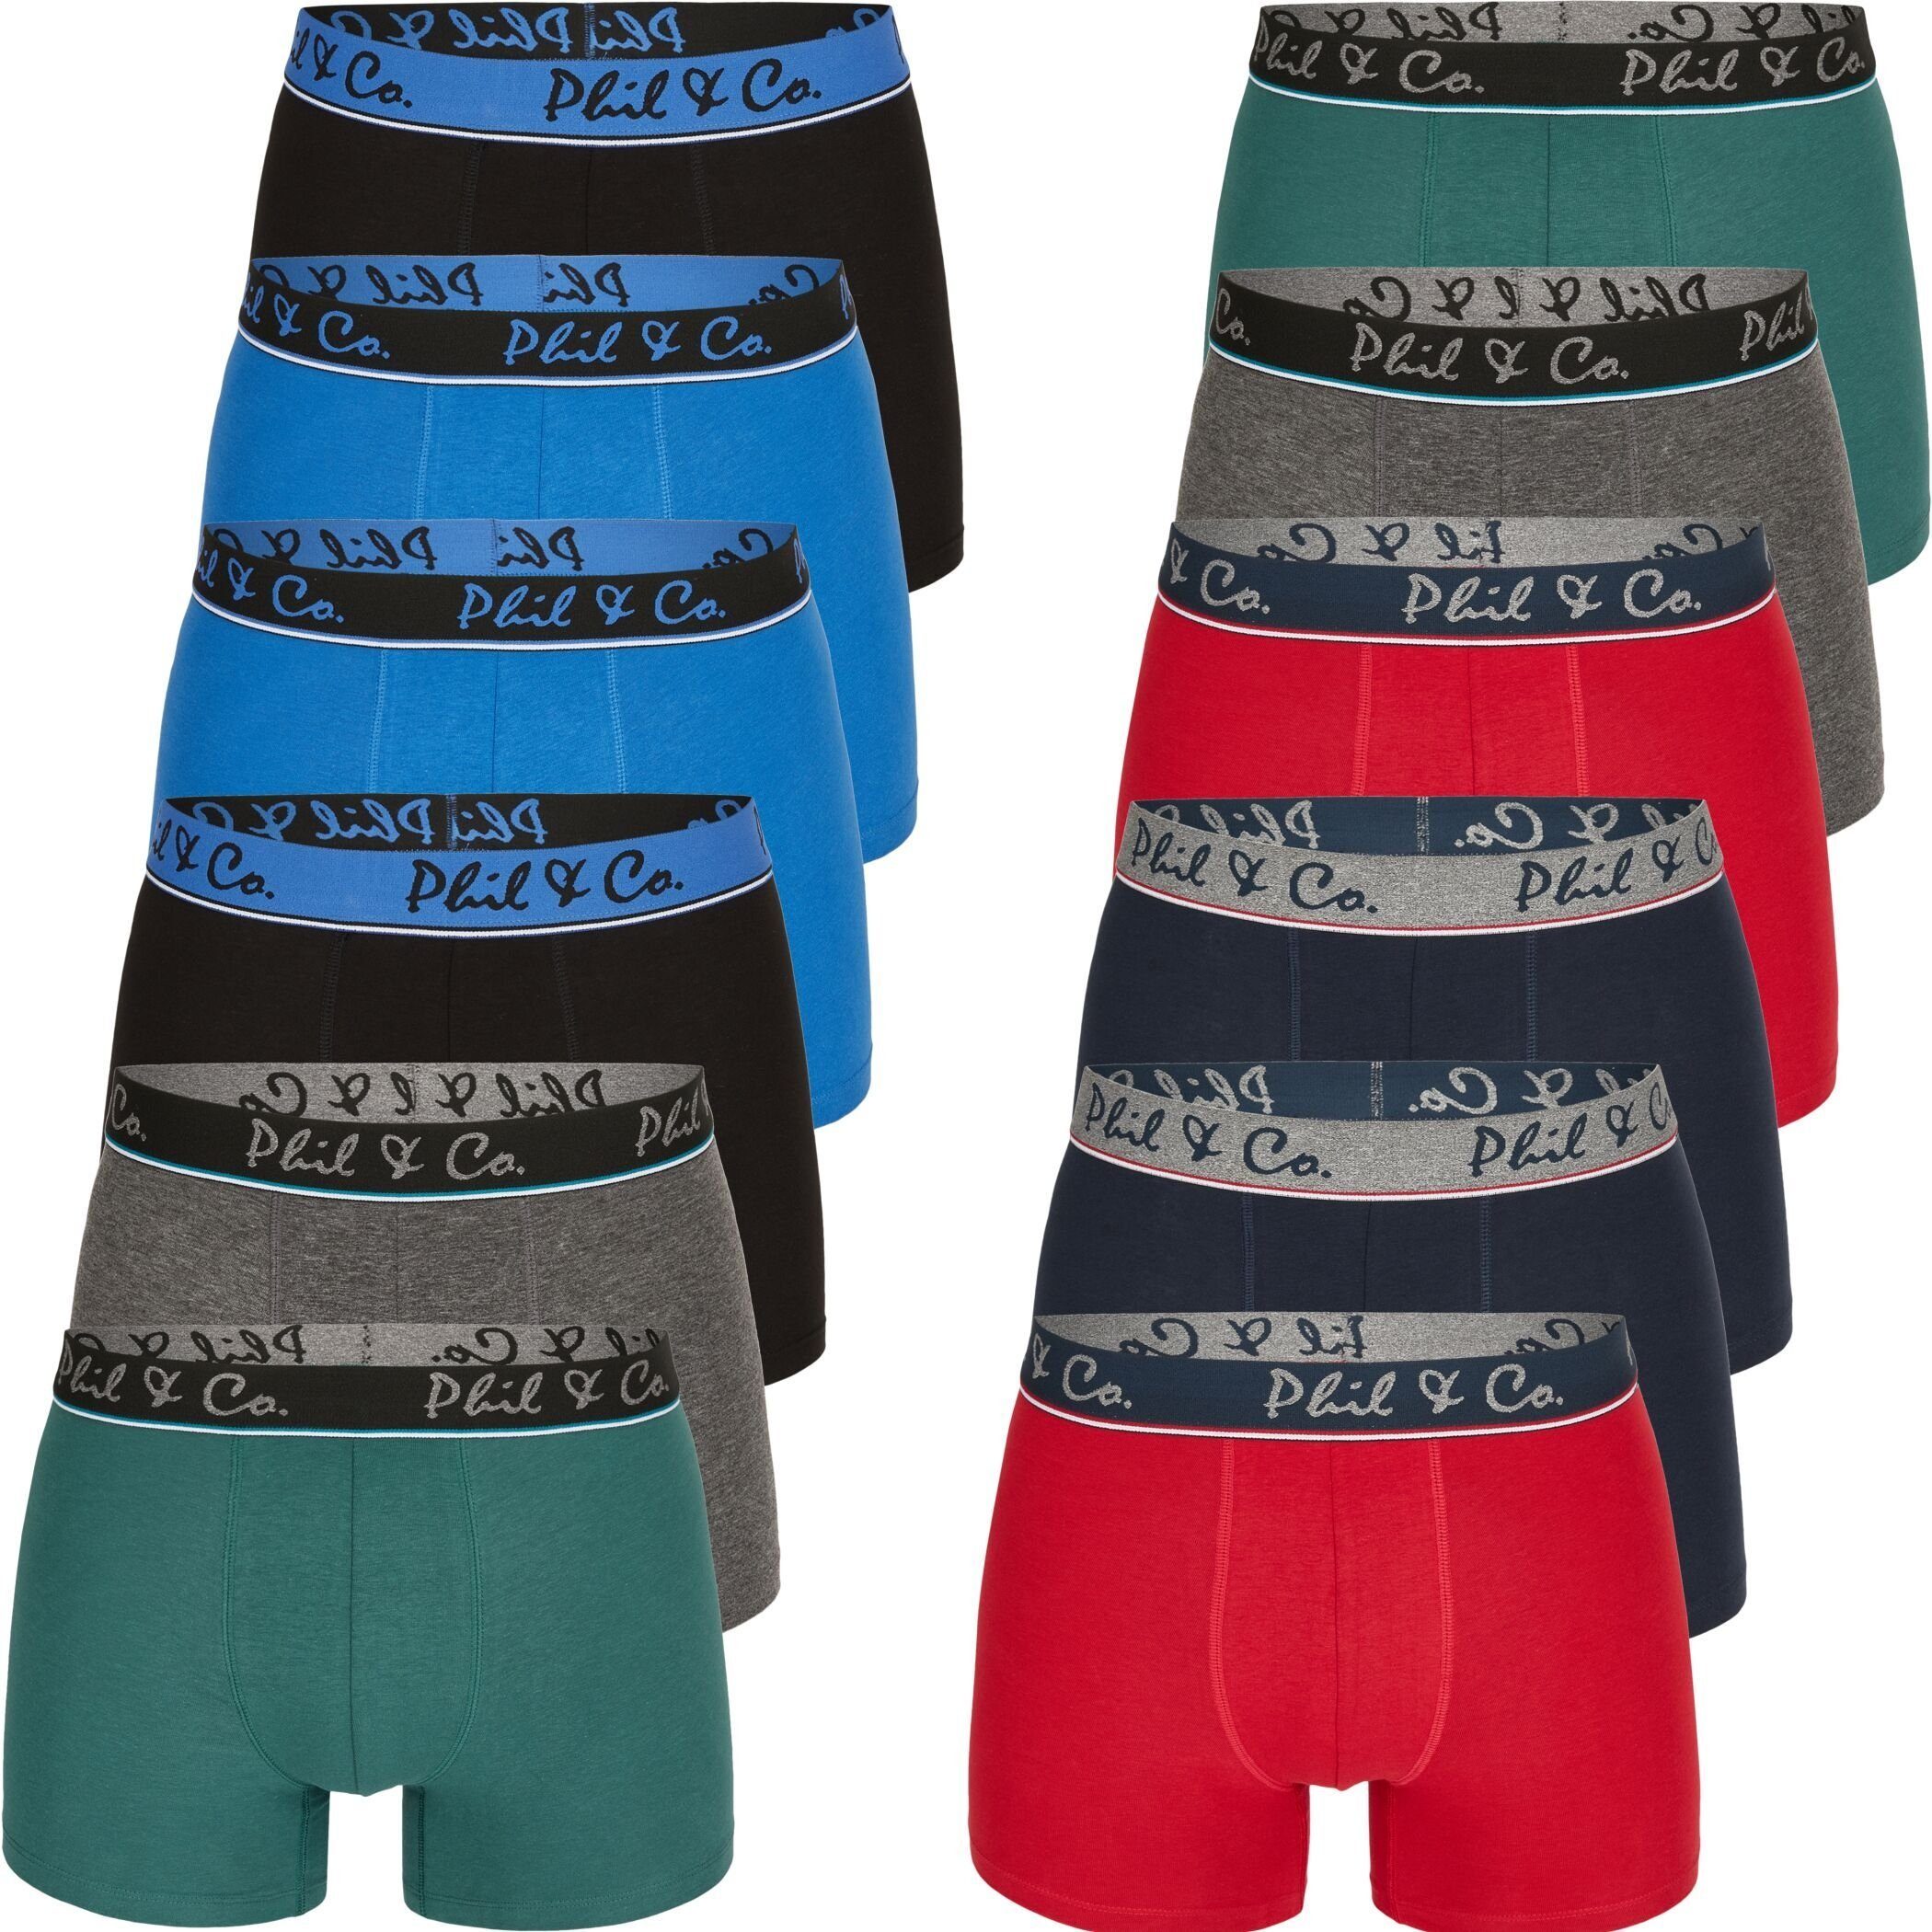 Phil & Co. Boxershorts 12 Pack Phil & Co Berlin Jersey Boxershorts Trunk Short Pant FARBWAHL (1-St) DESIGN 06